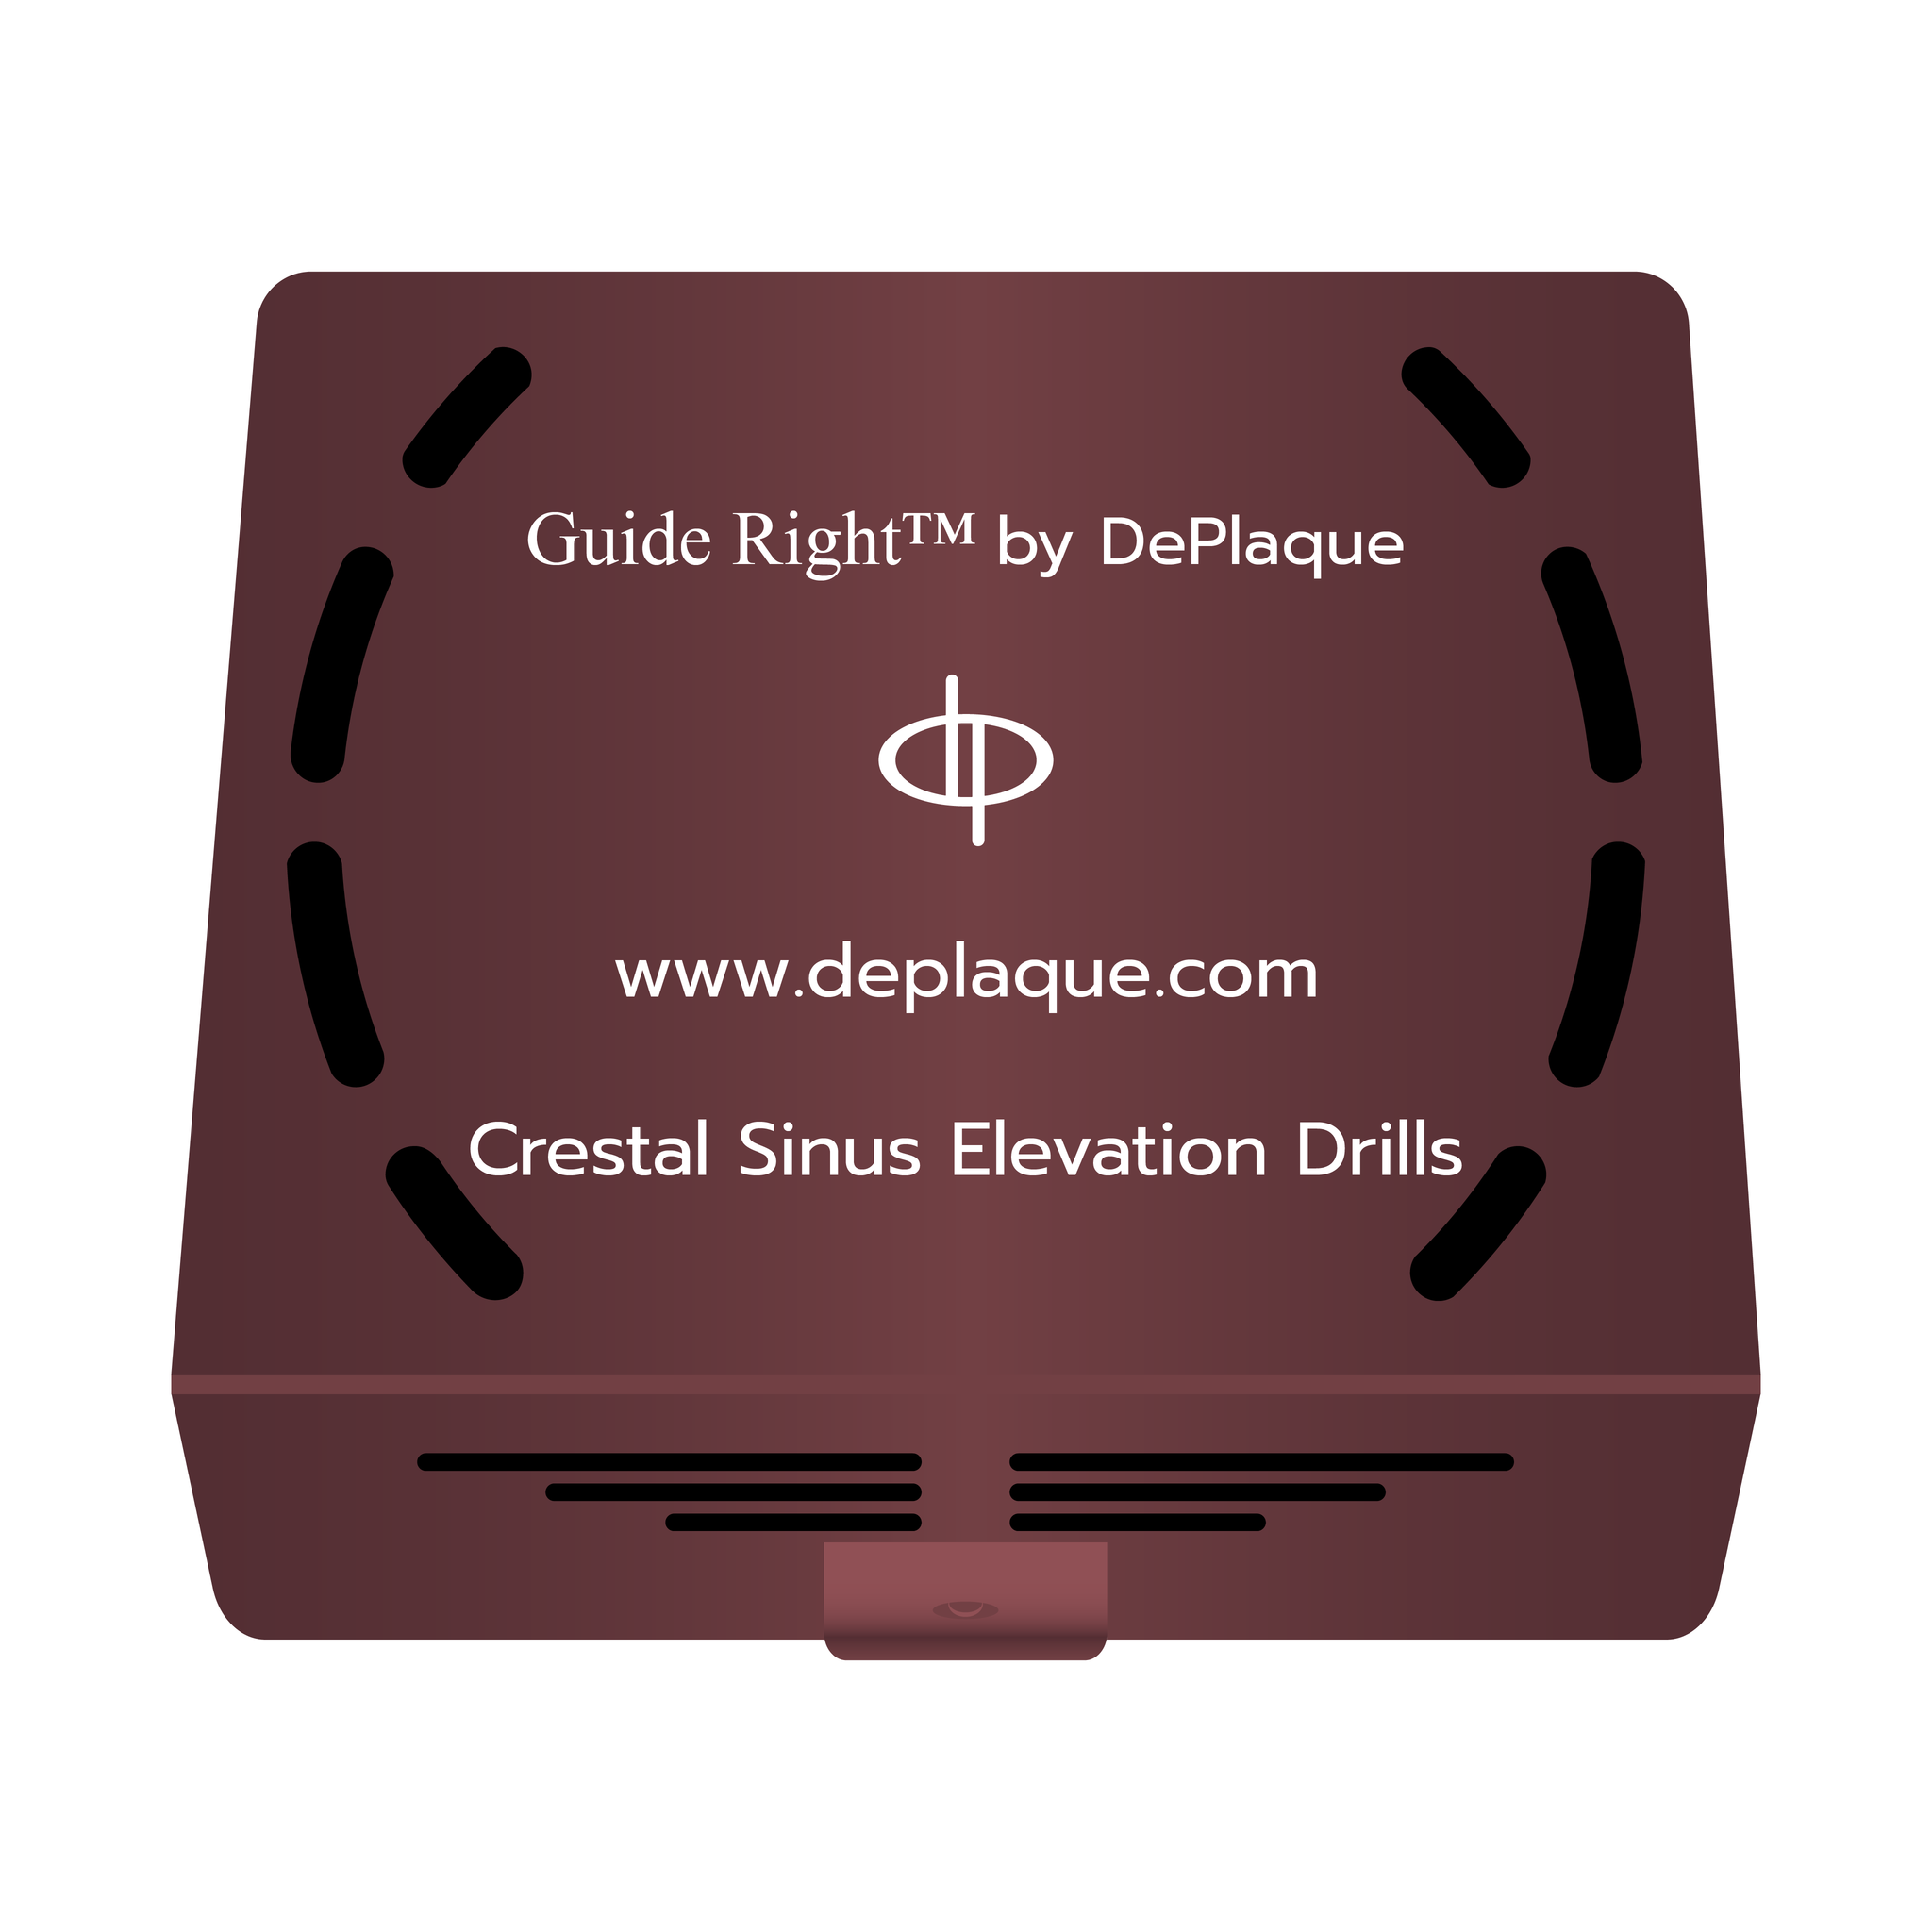 A maroon square metal box. The box says ‘Guide Right™ by DePlaque, a ‘dp’ logo, ‘www.deplaque.com,’ and Crestal Sinus Elevation Drills.